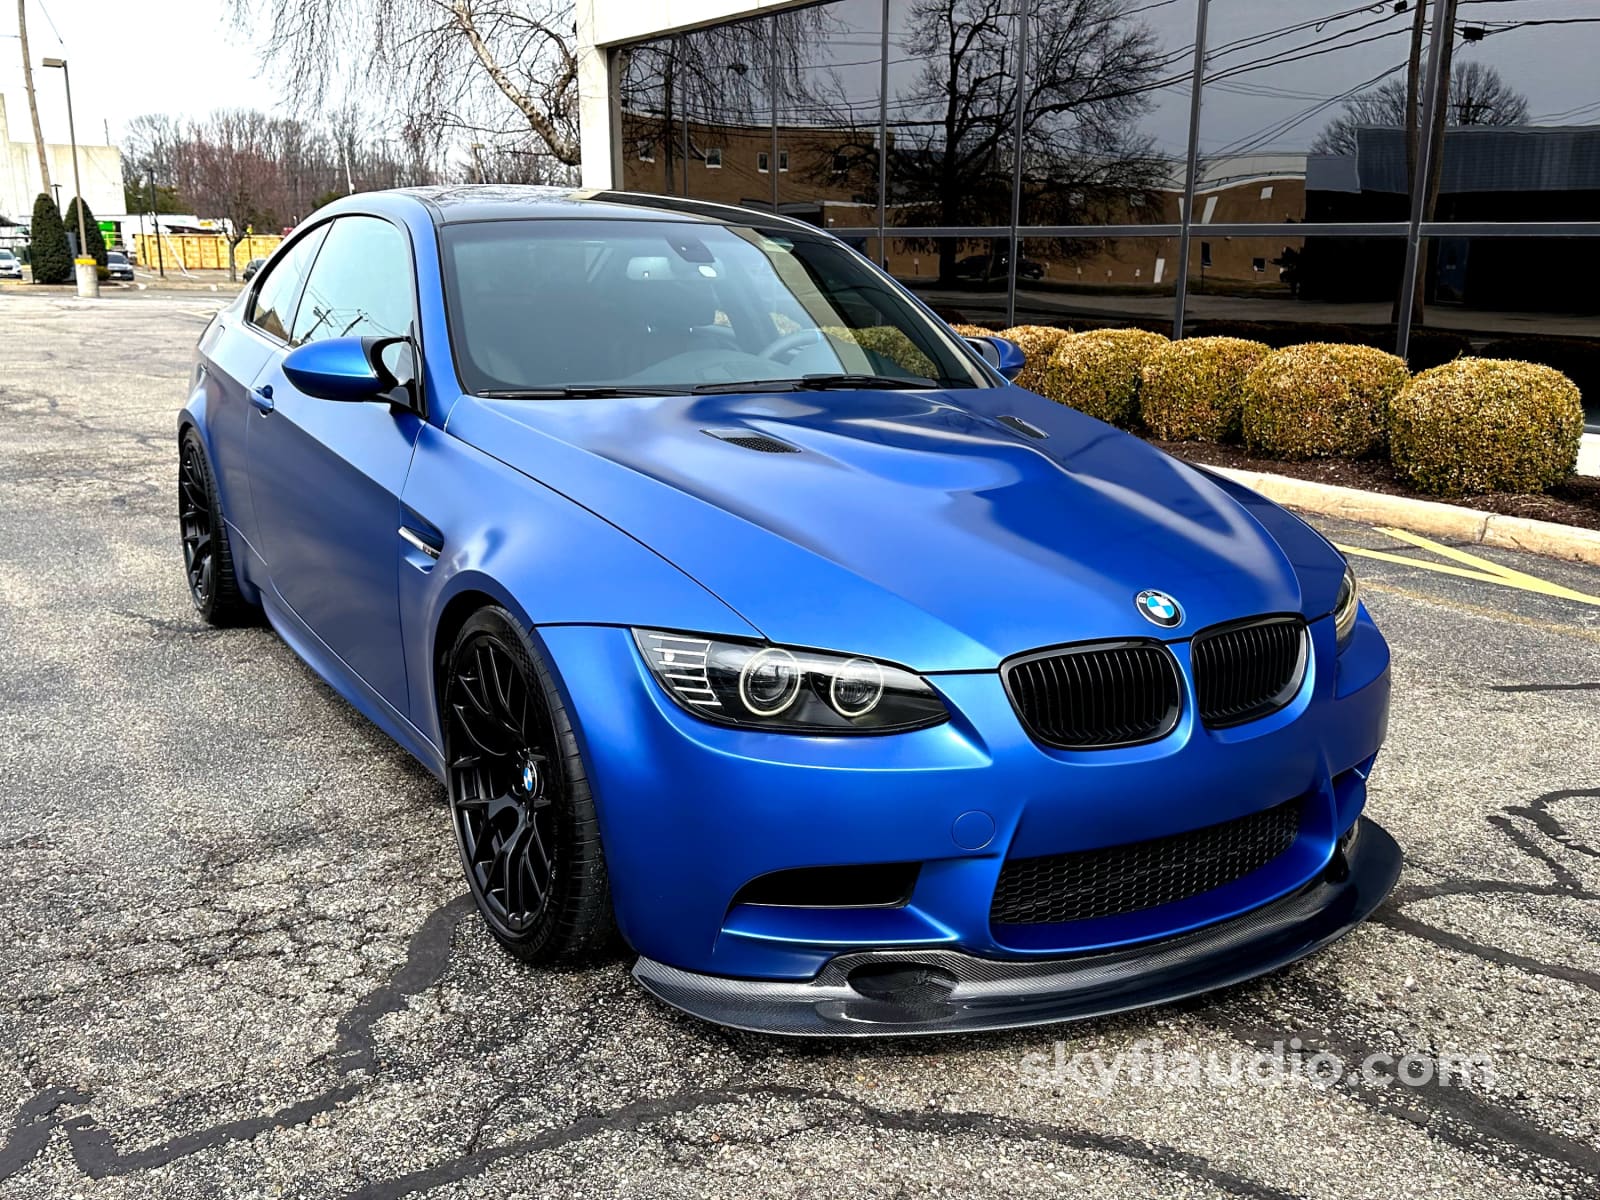 2013 Bmw M3 Coupe - Rare Individual Spec Frozen Blue 1 Of 150 In The Usa Vehicle